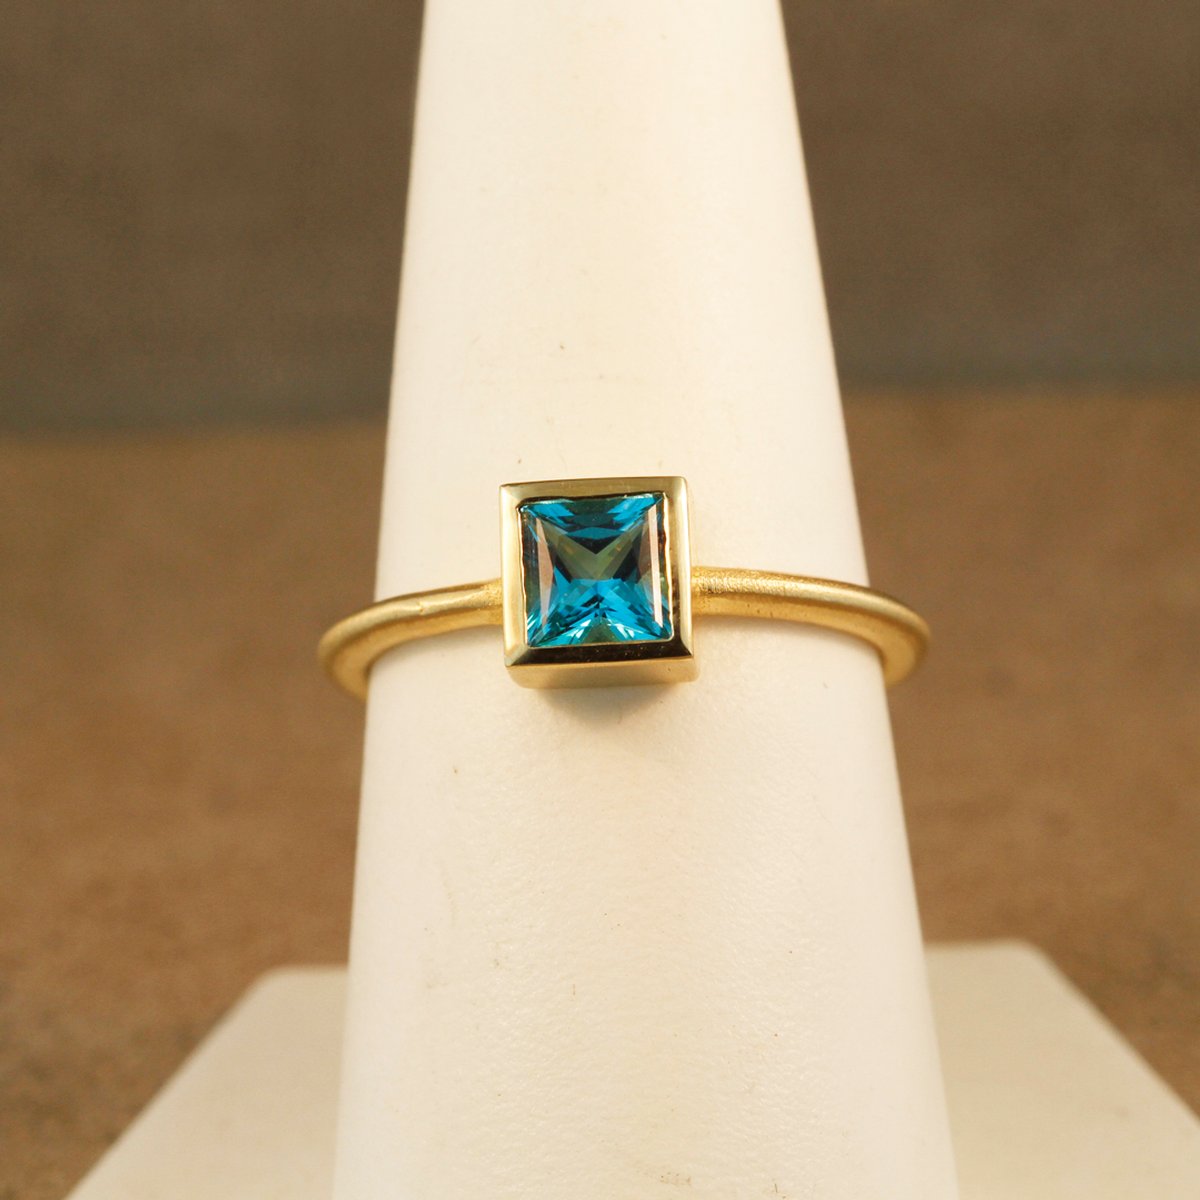 Minima Collection Square Blue Topaz Ring, 14k Yellow gold